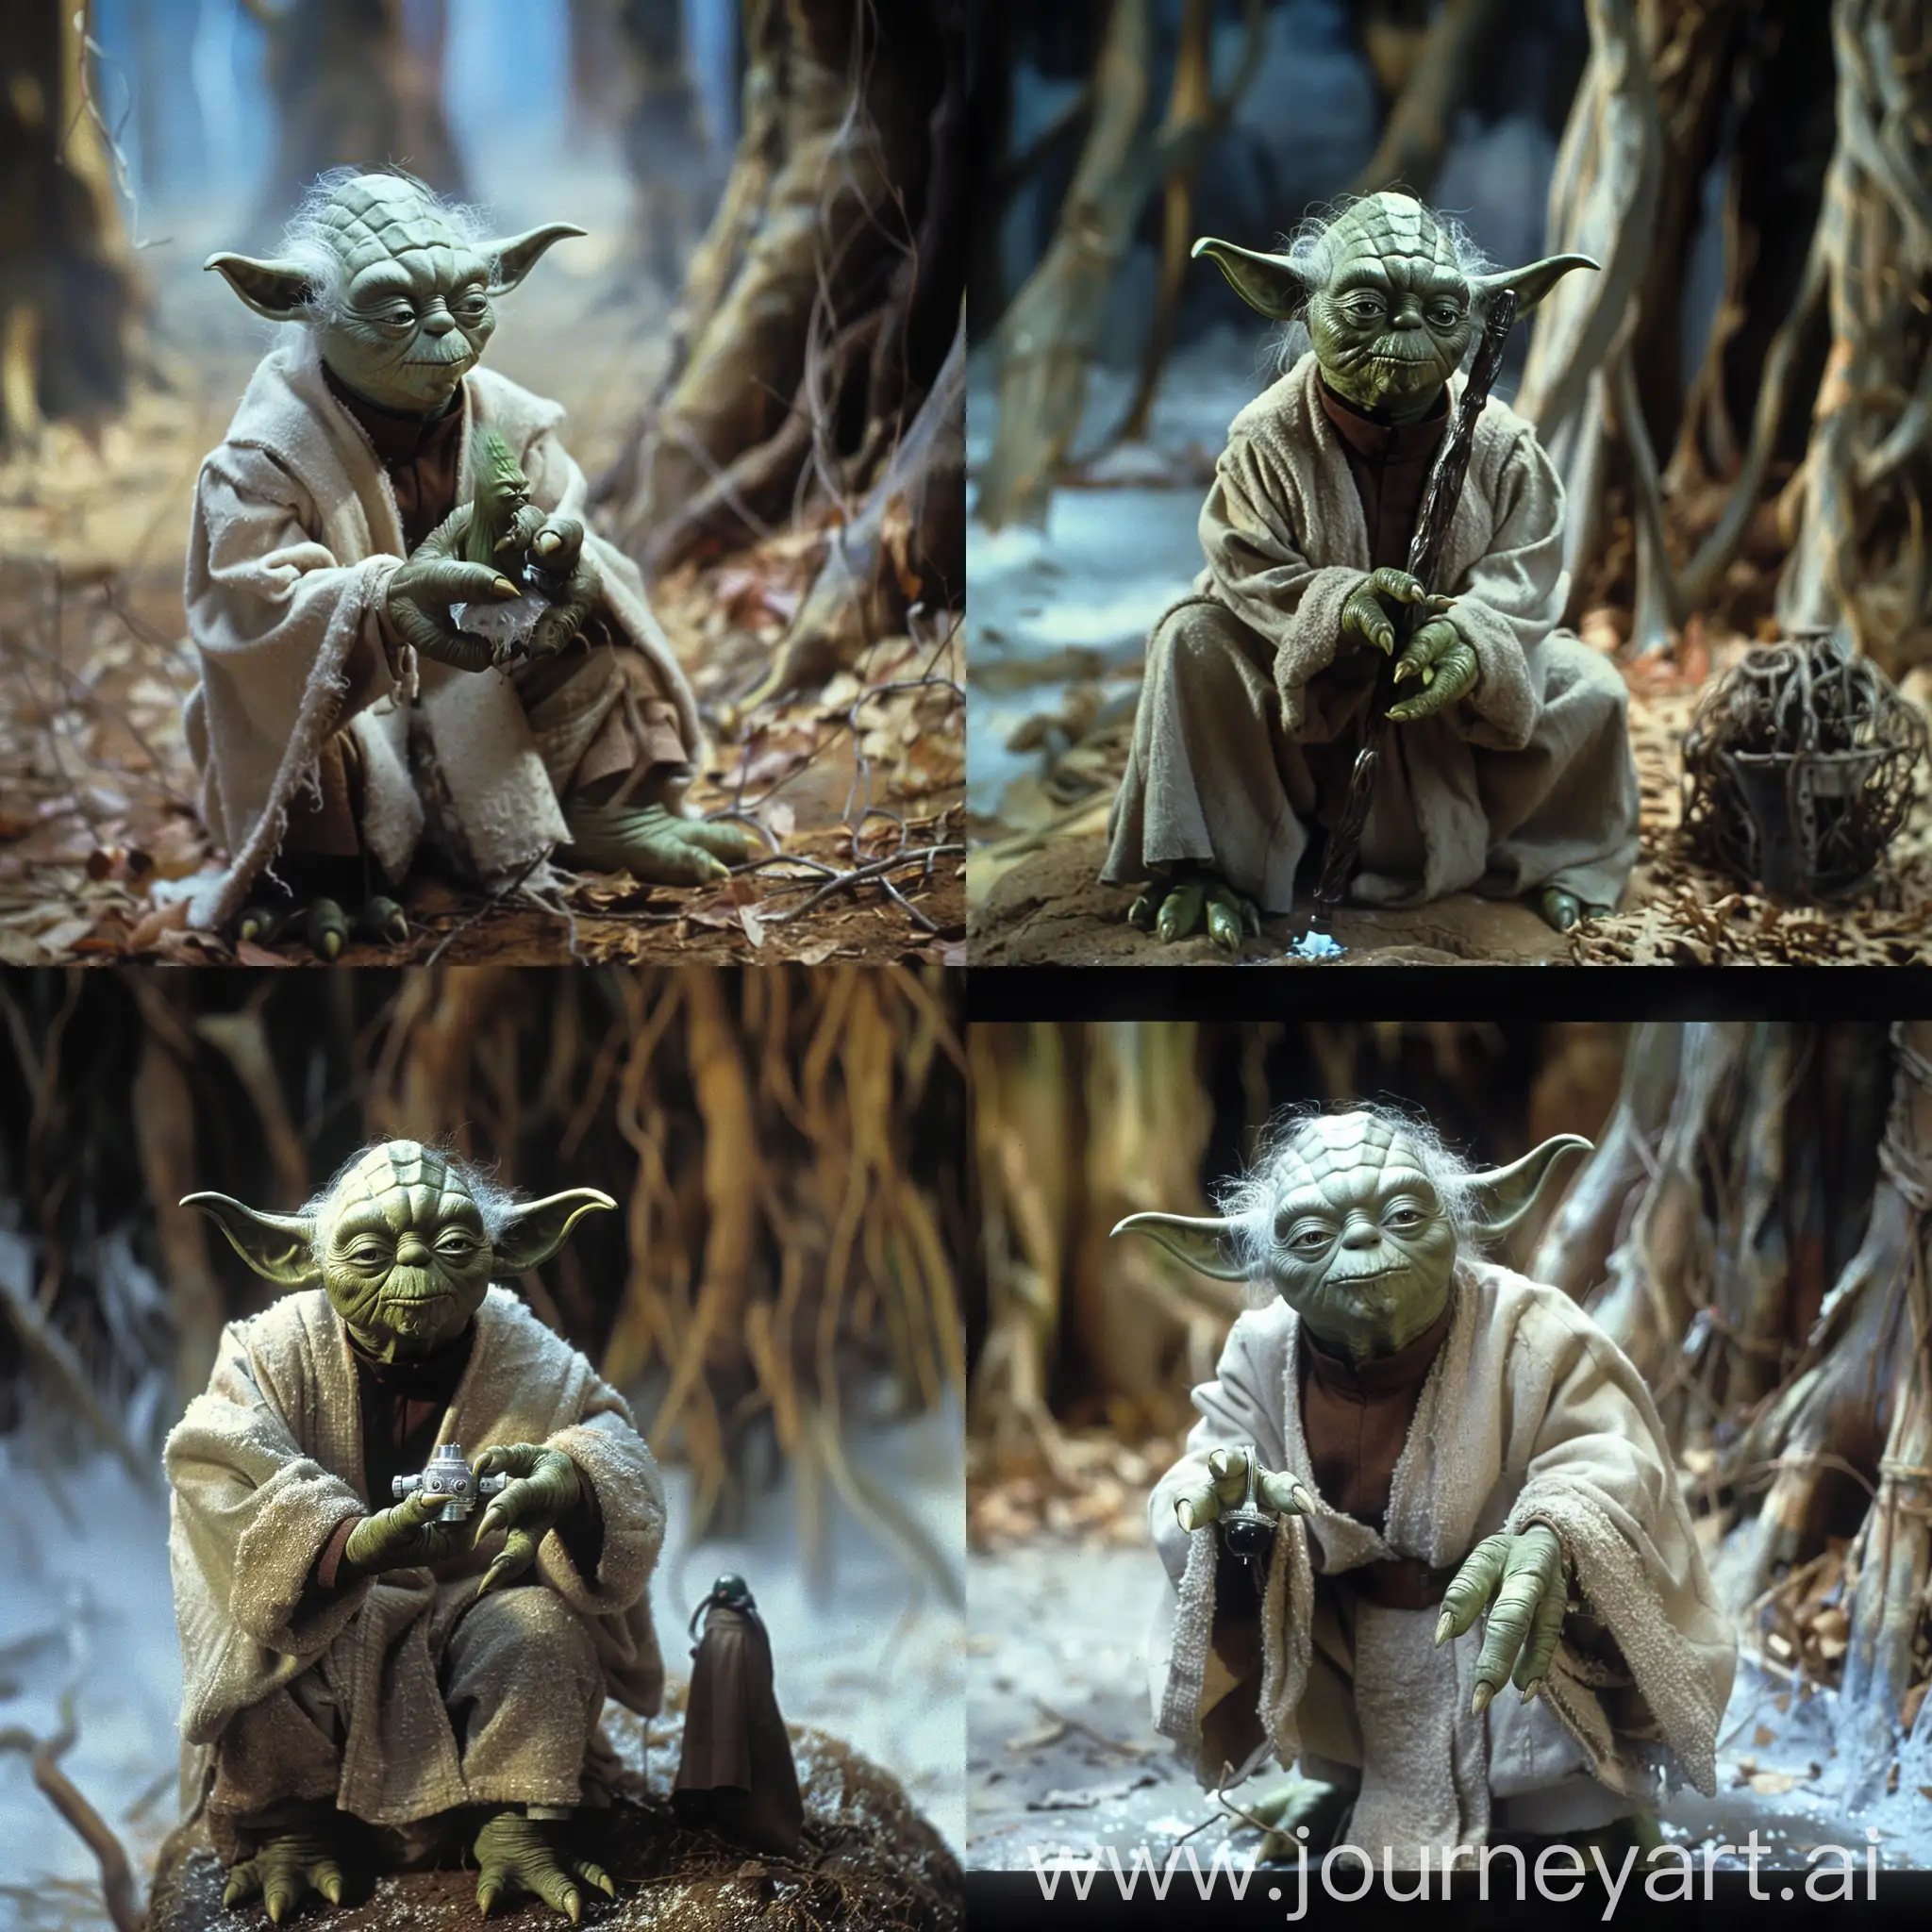 yoda using the force to fix nature
